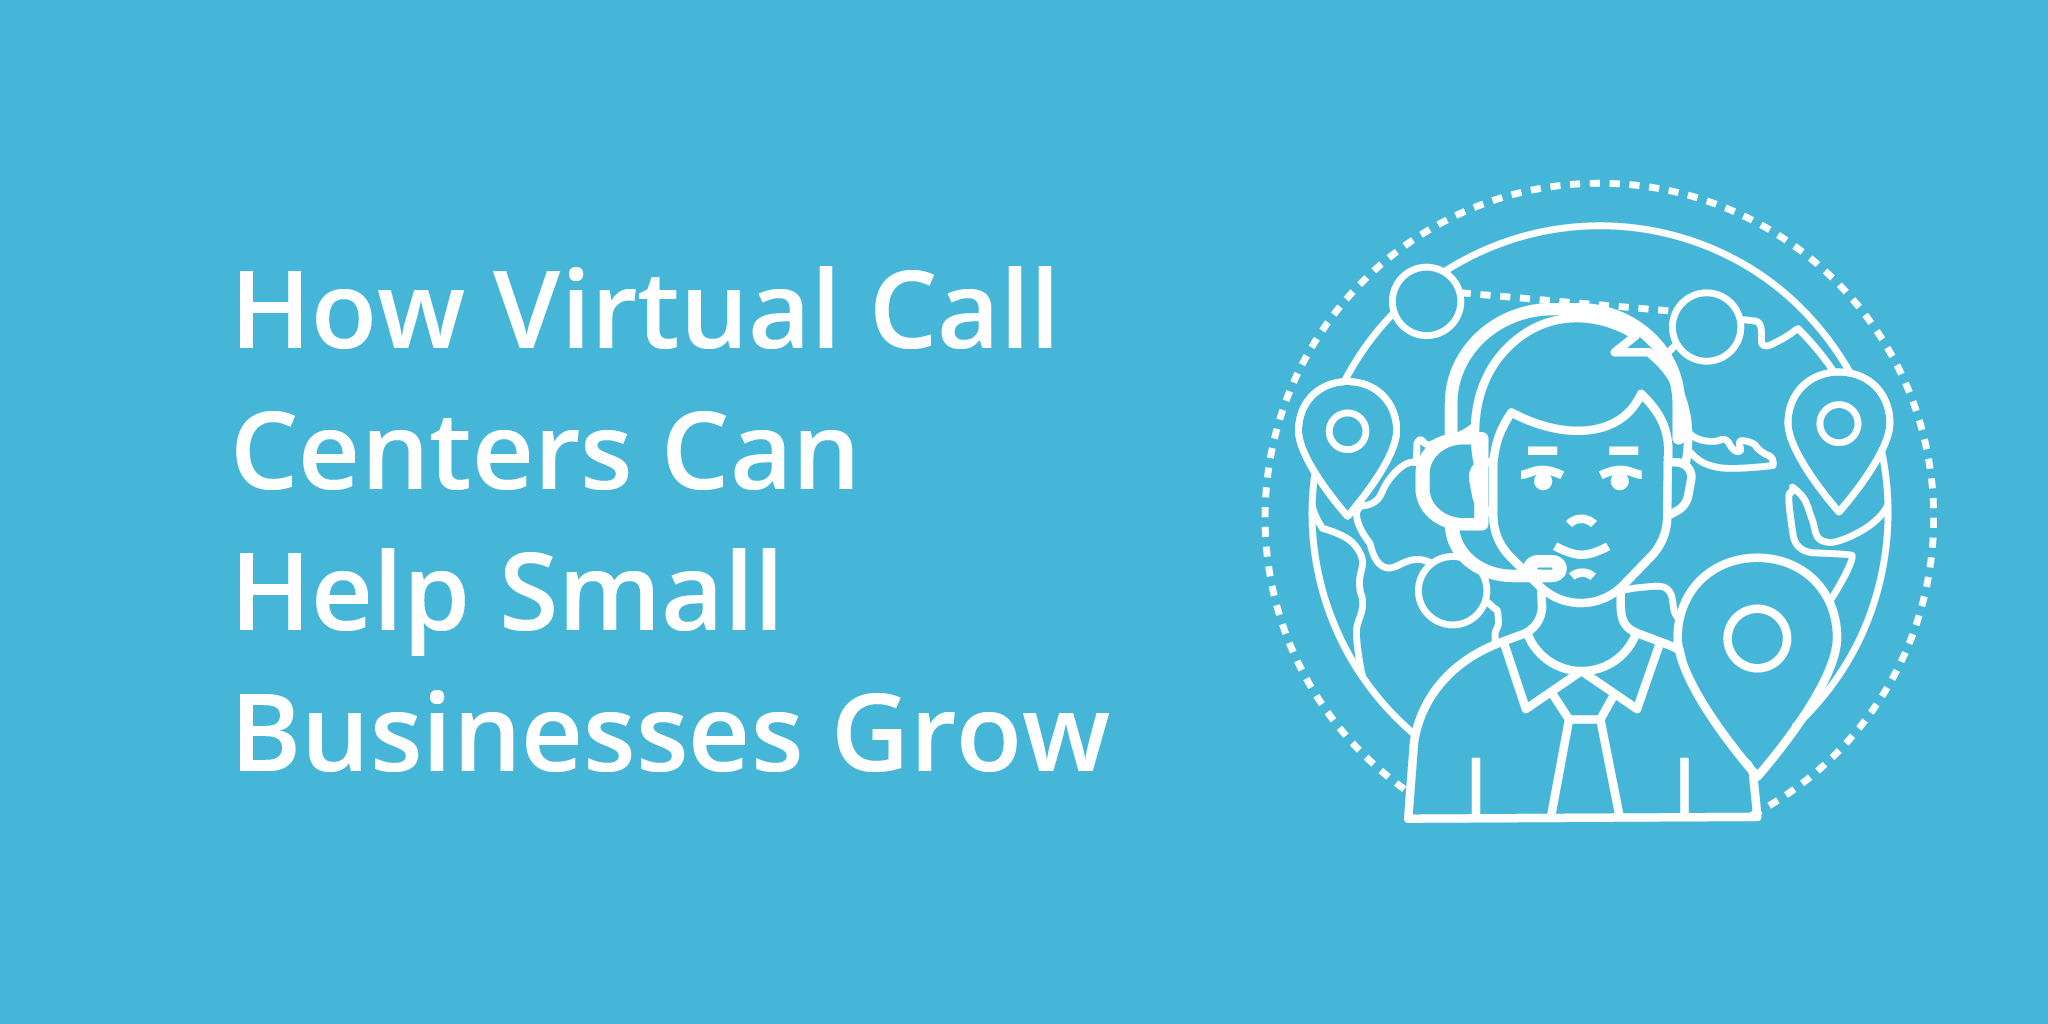 How Virtual Call Centers Can Help Small Businesses Grow | Telephones for business